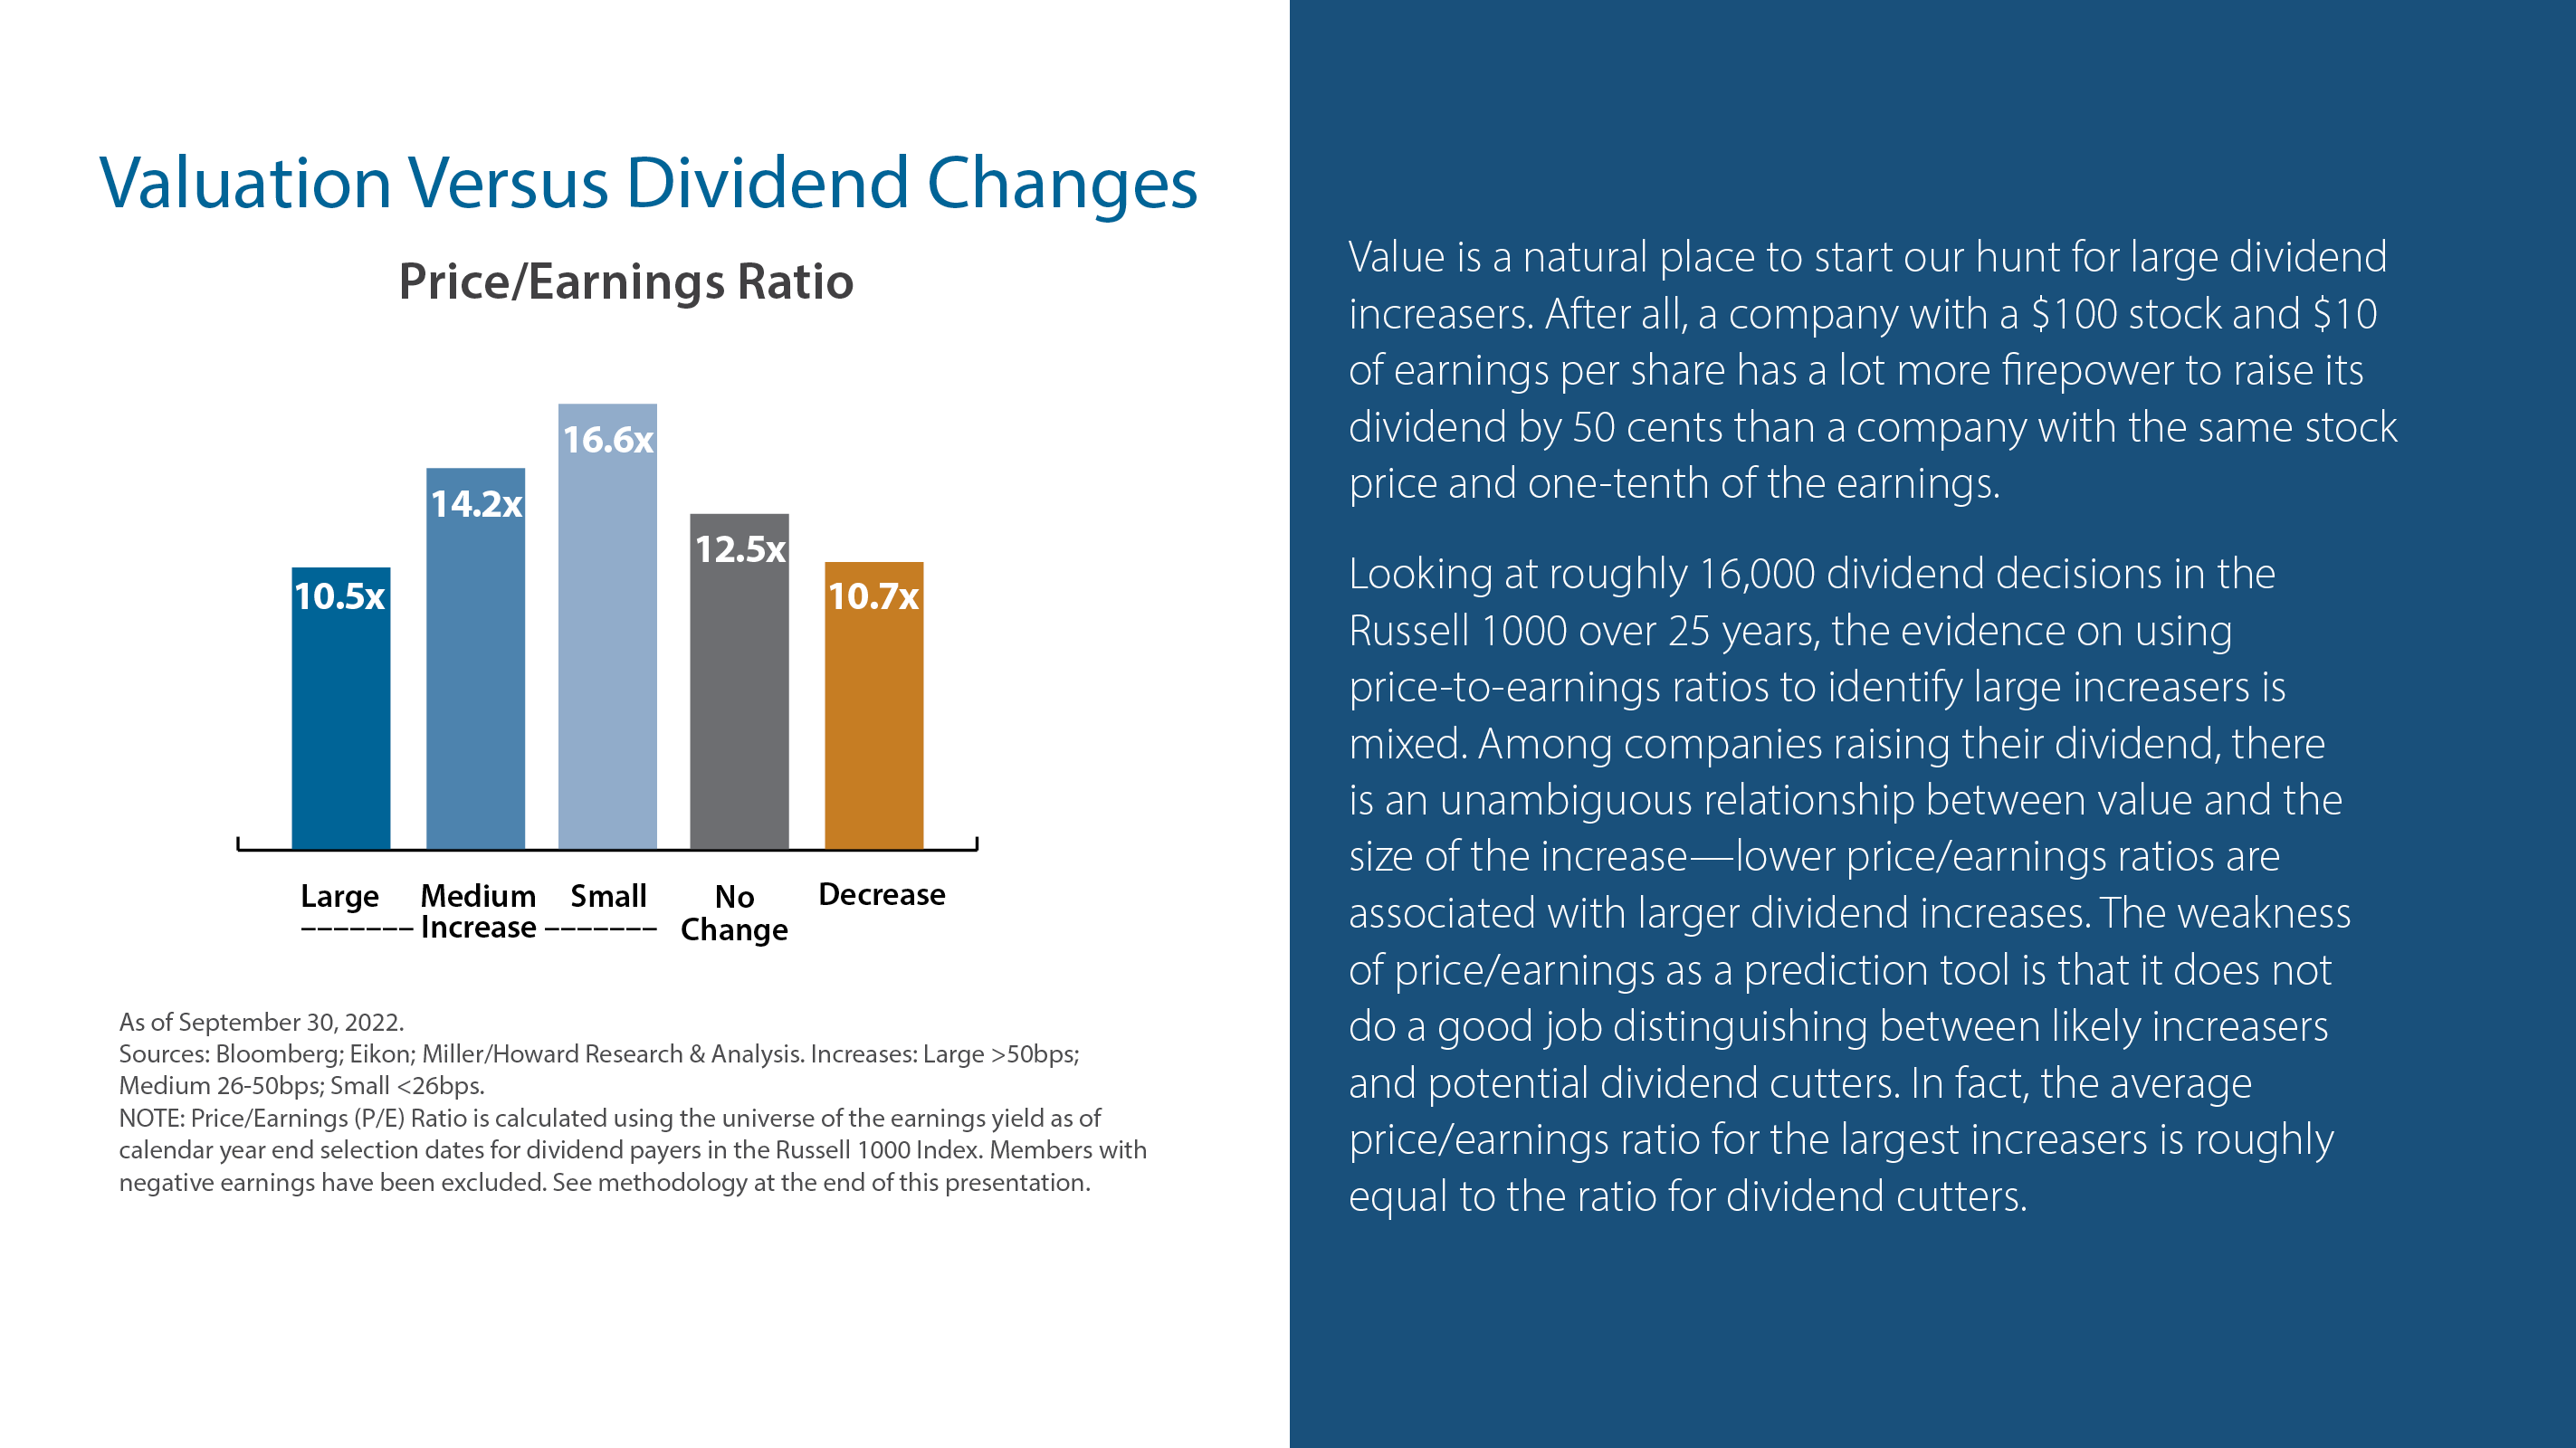 Valuation Versus Dividend Changes 1 - Price/Earnings